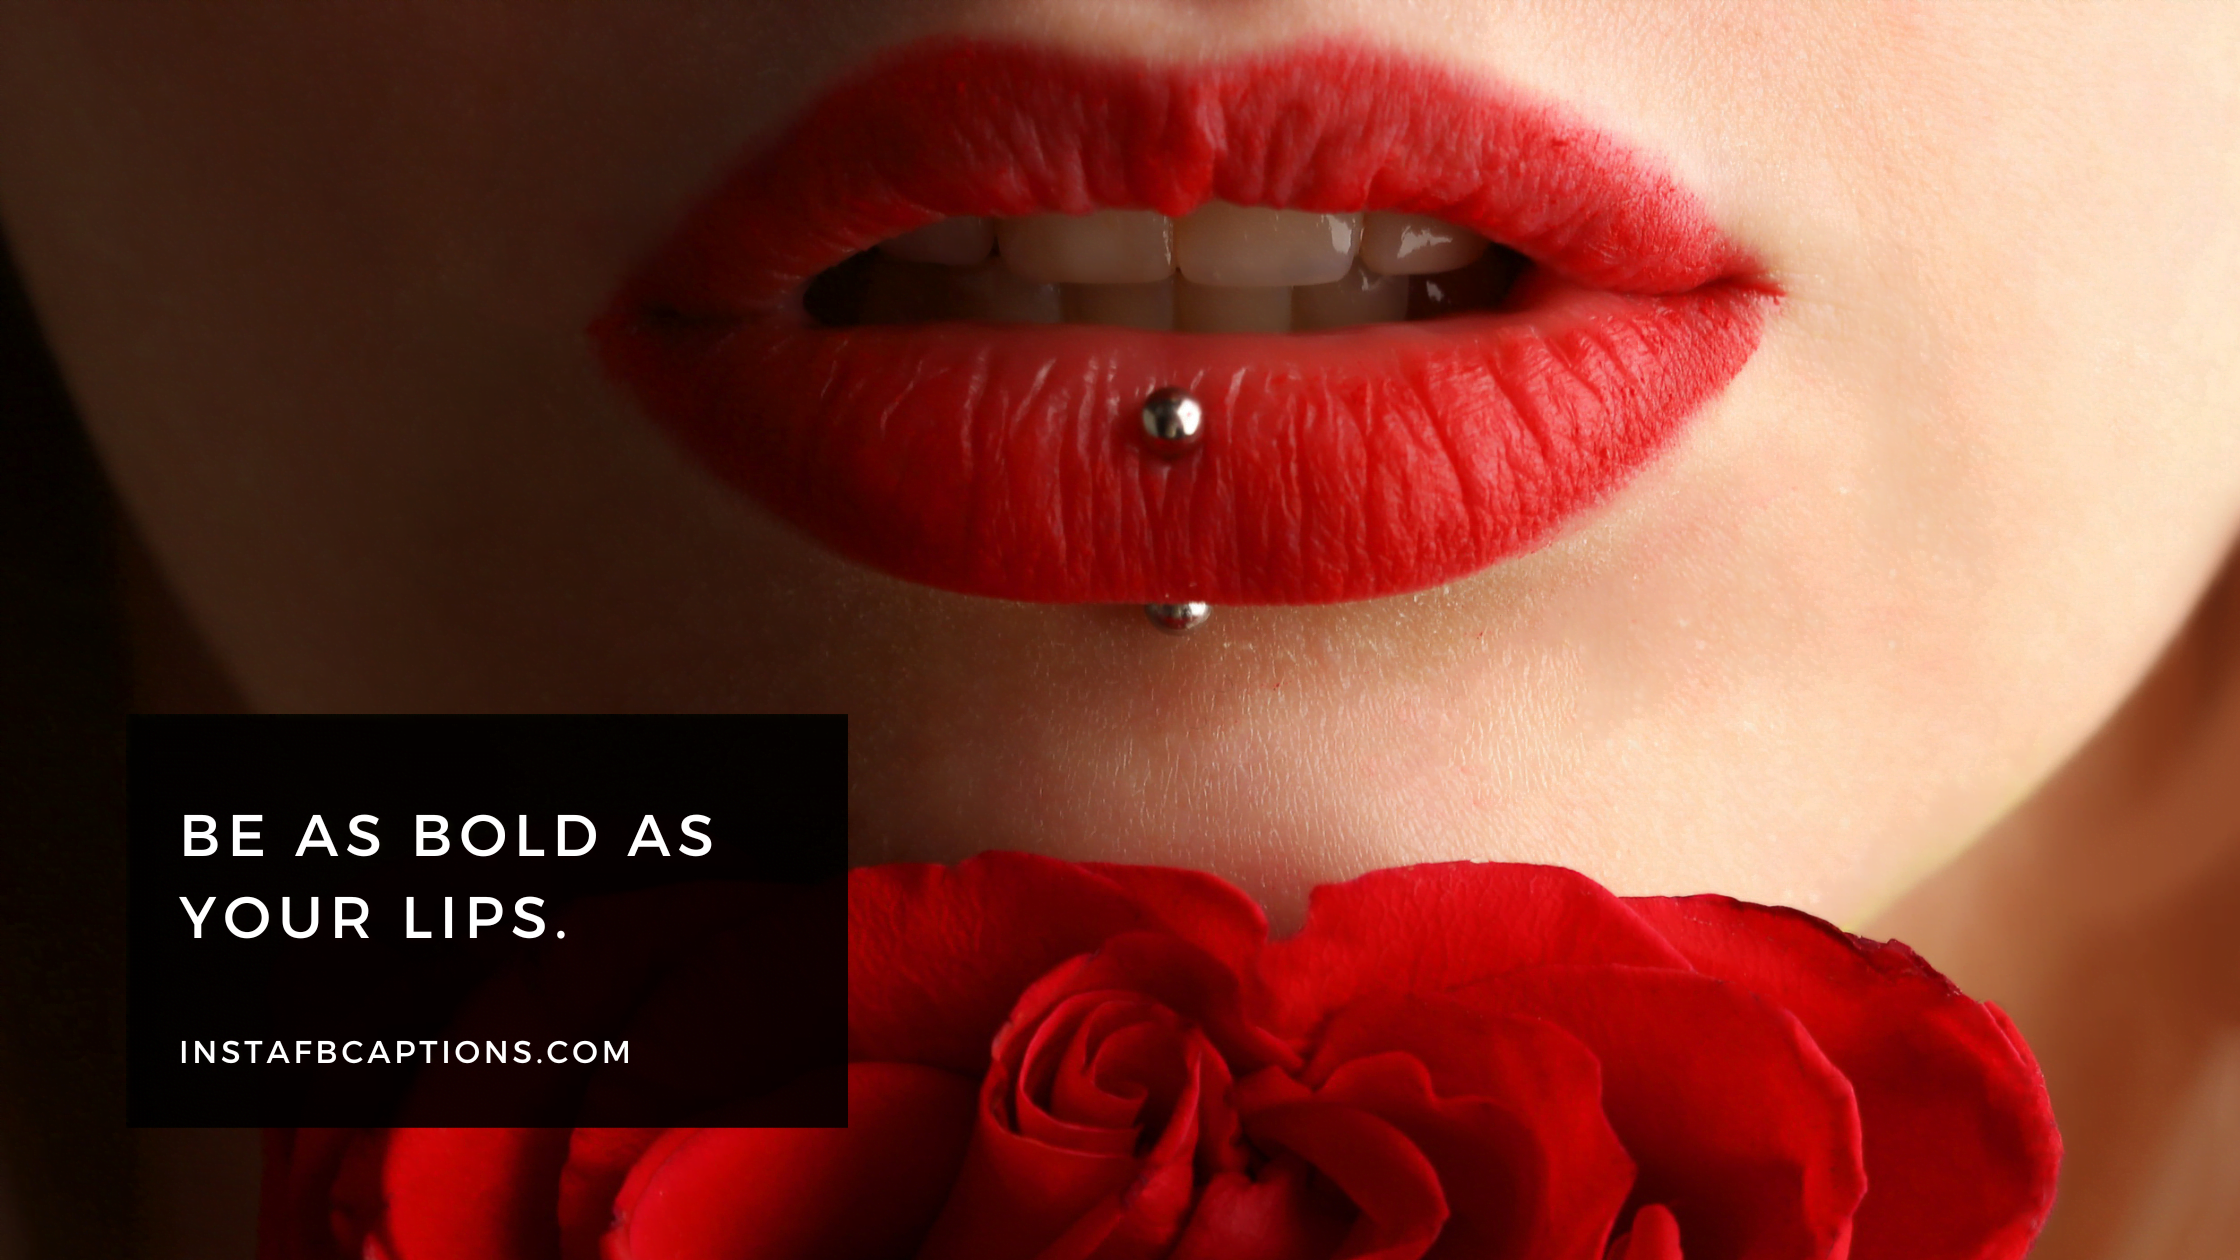 Wearing Red Lipstick Quotes  - Wearing Red Lipstick Quotes - Red Lipstick Captions Quotes for Instagram in 2022